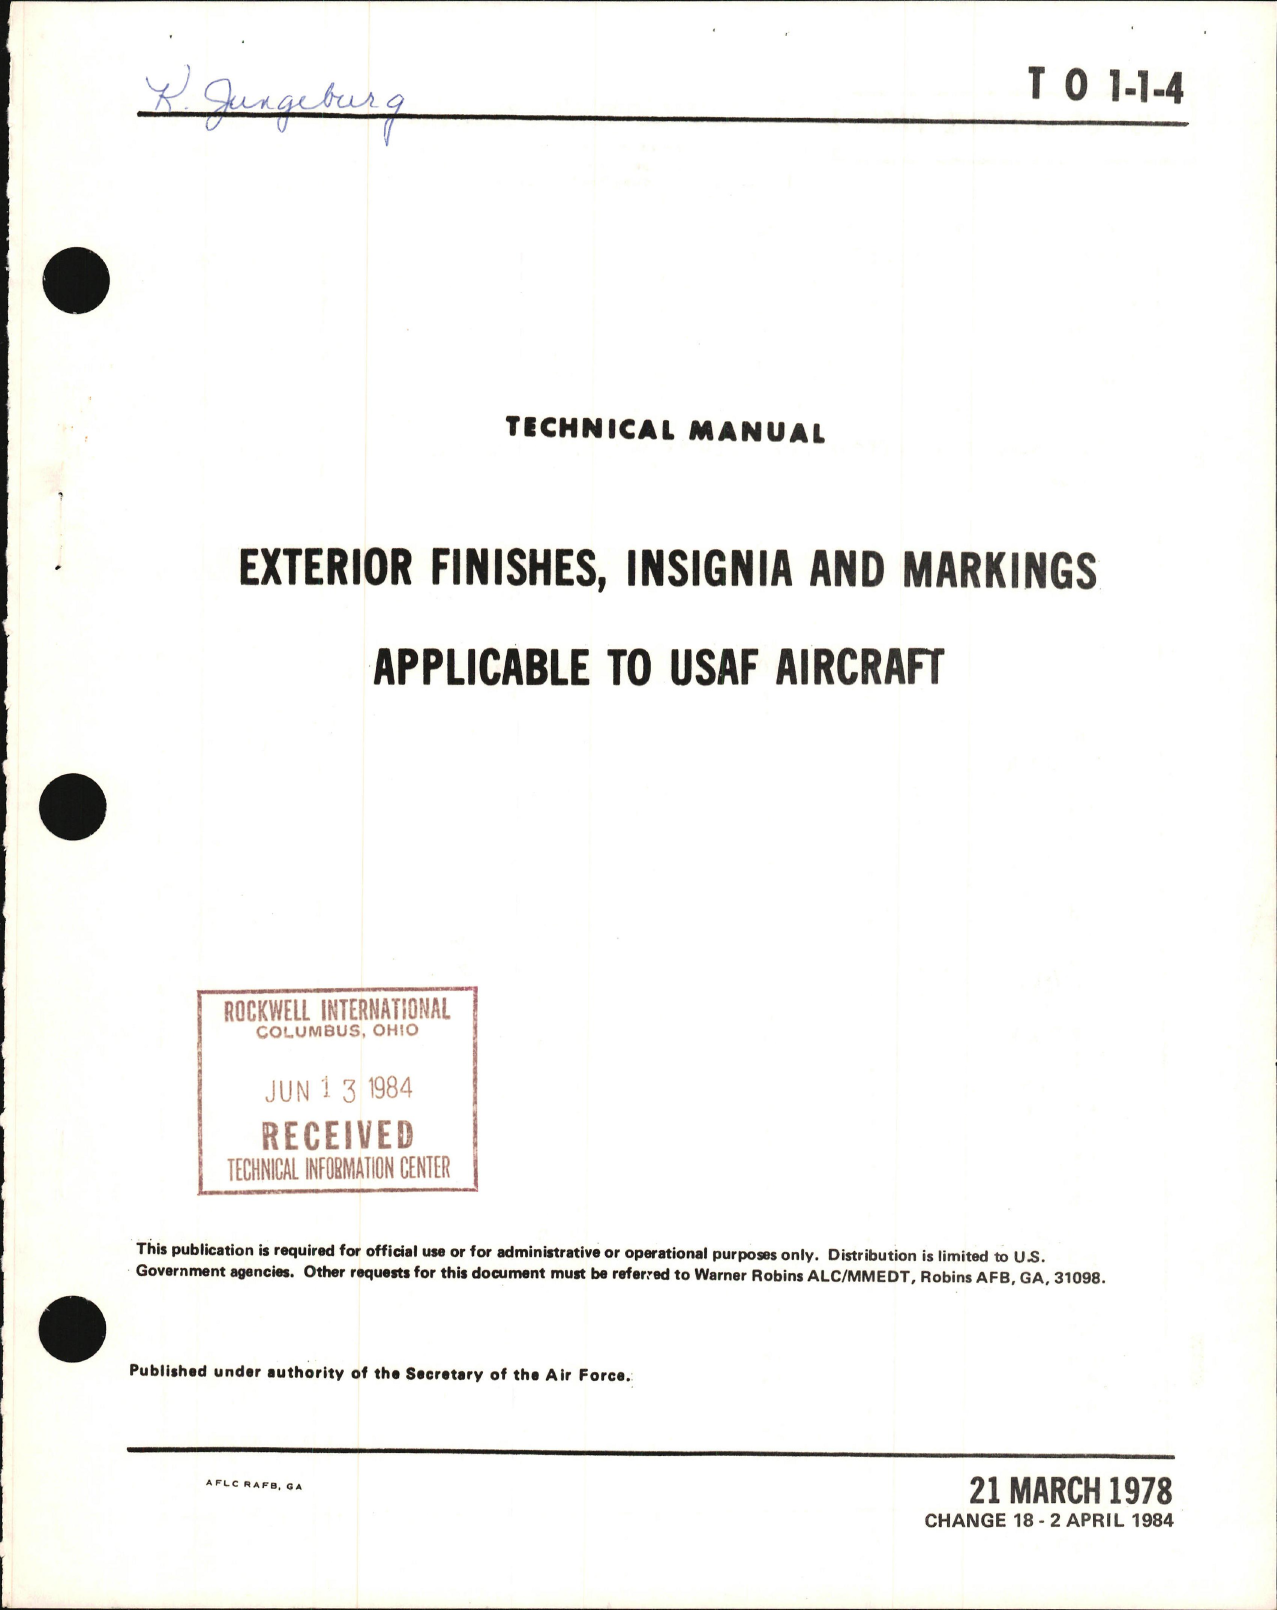 Sample page 1 from AirCorps Library document: Exterior Finishes, Insignia and Markings for USAF Aircraft - Change - 18